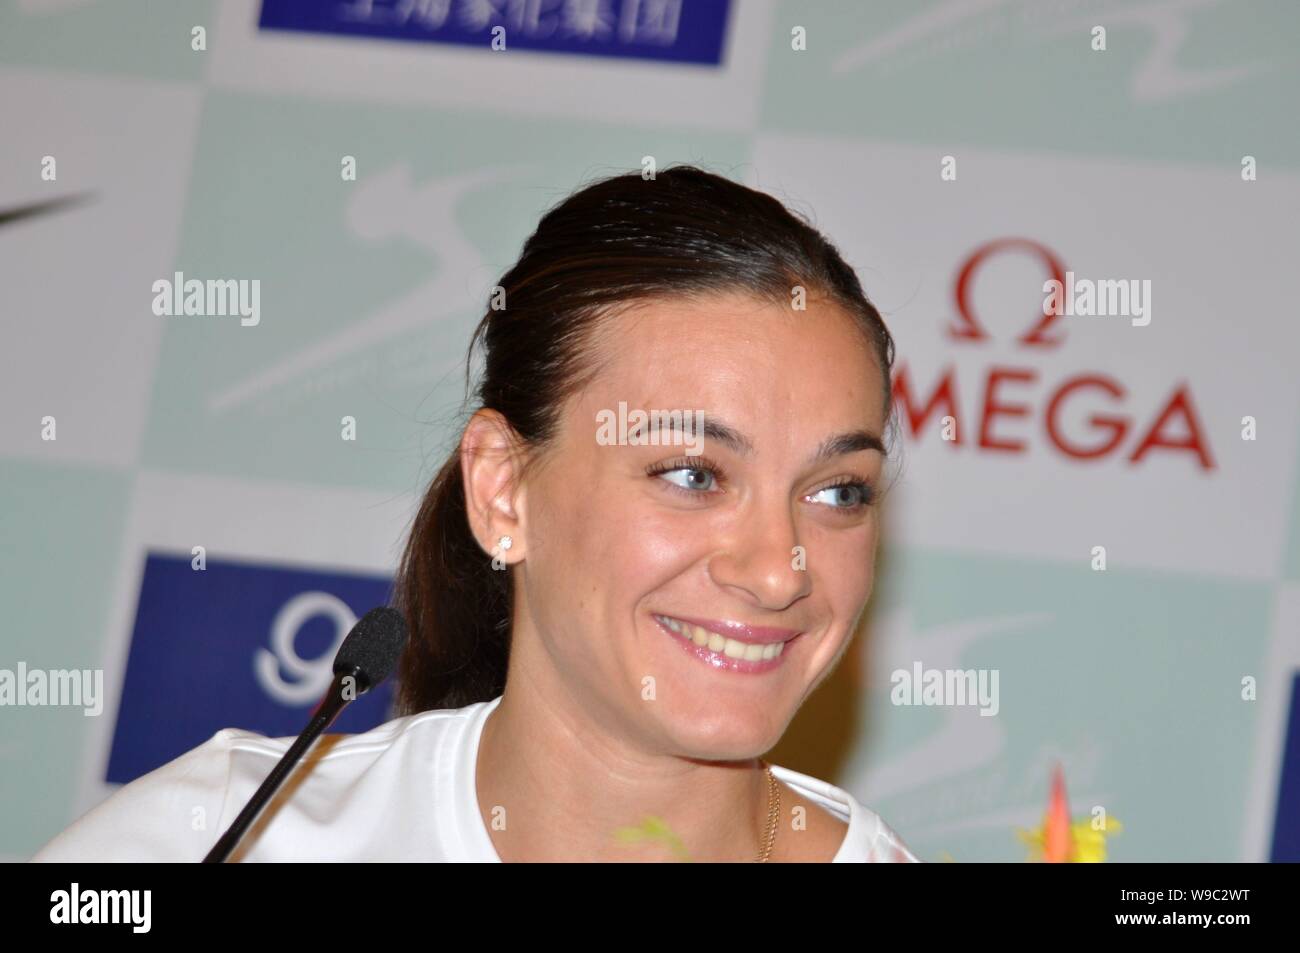 Russian pole vault world record holder Yelena Isinbayeva is seen during a press conference for the upcoming Shanghai Golden Grand Prix in Shanghai, Ch Stock Photo